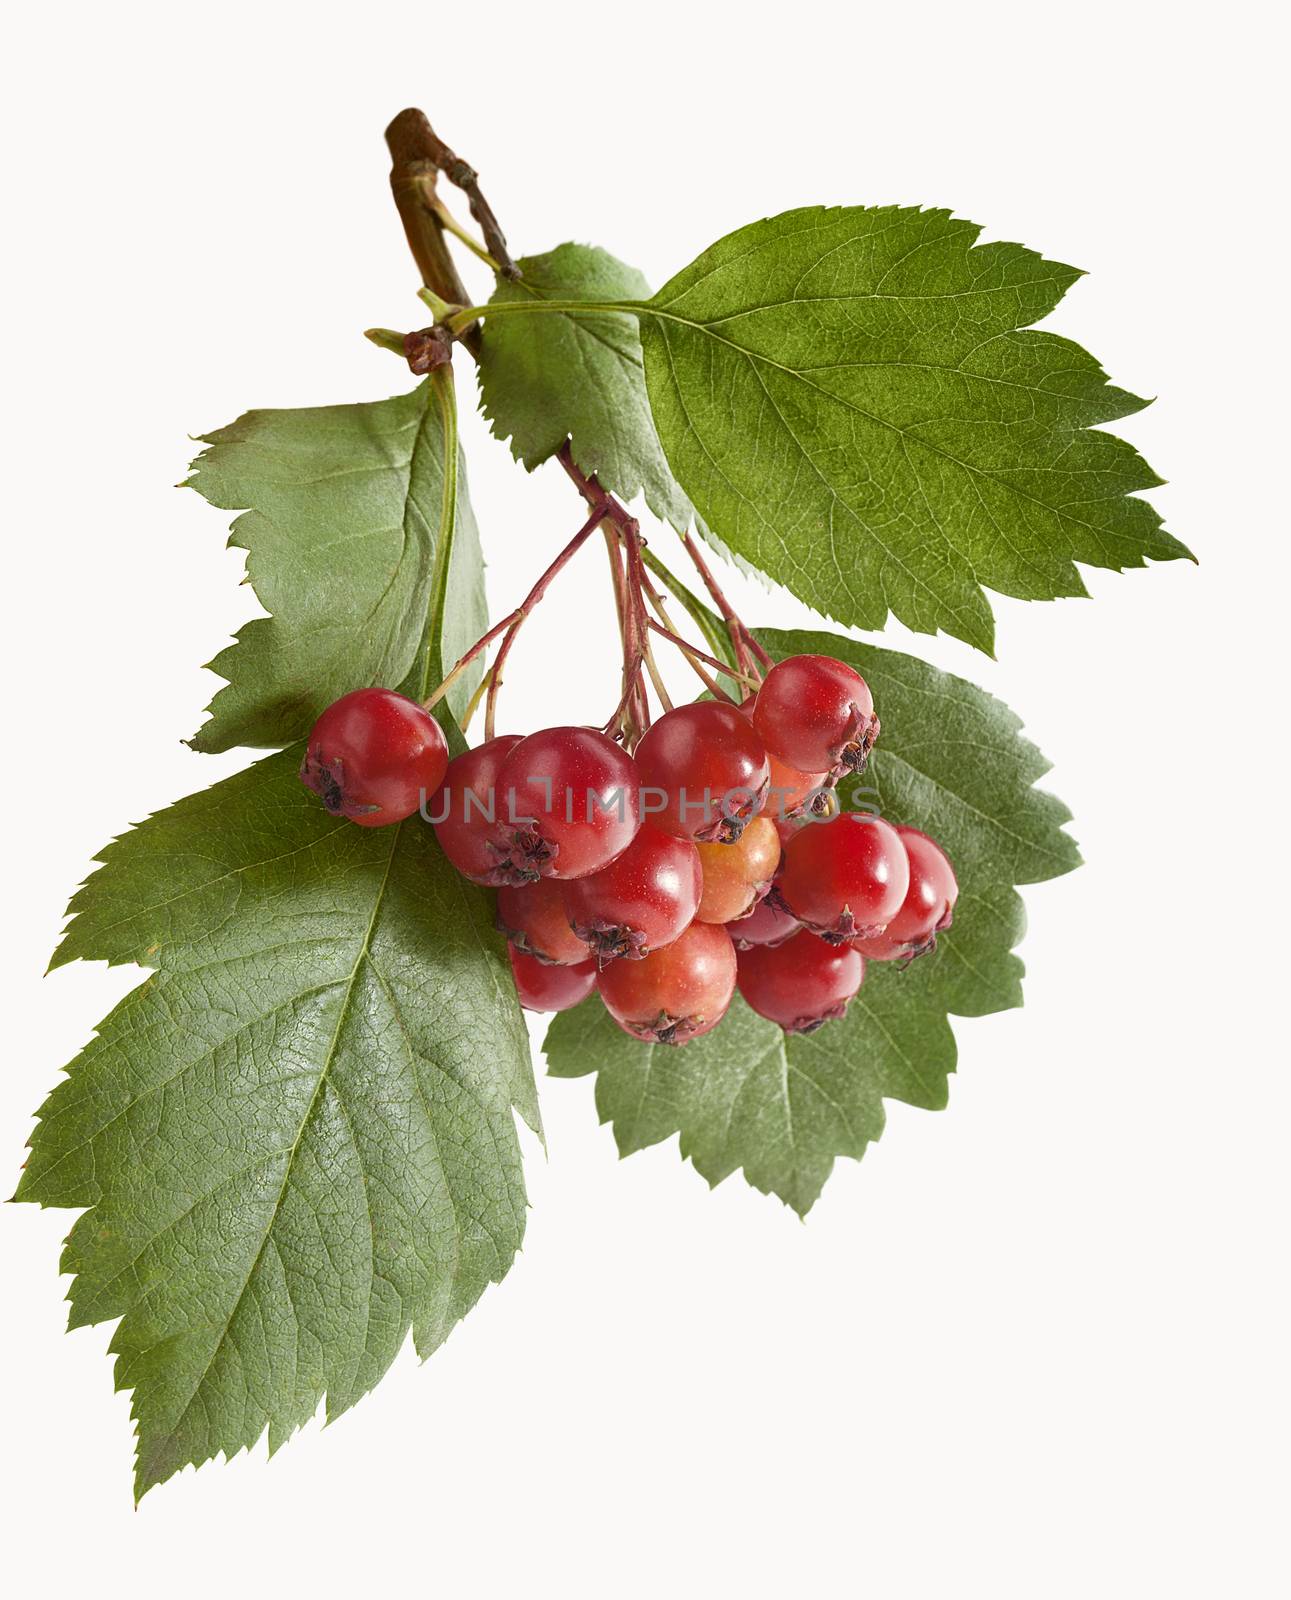 Isolated branch of hawthorn with berries and leaves